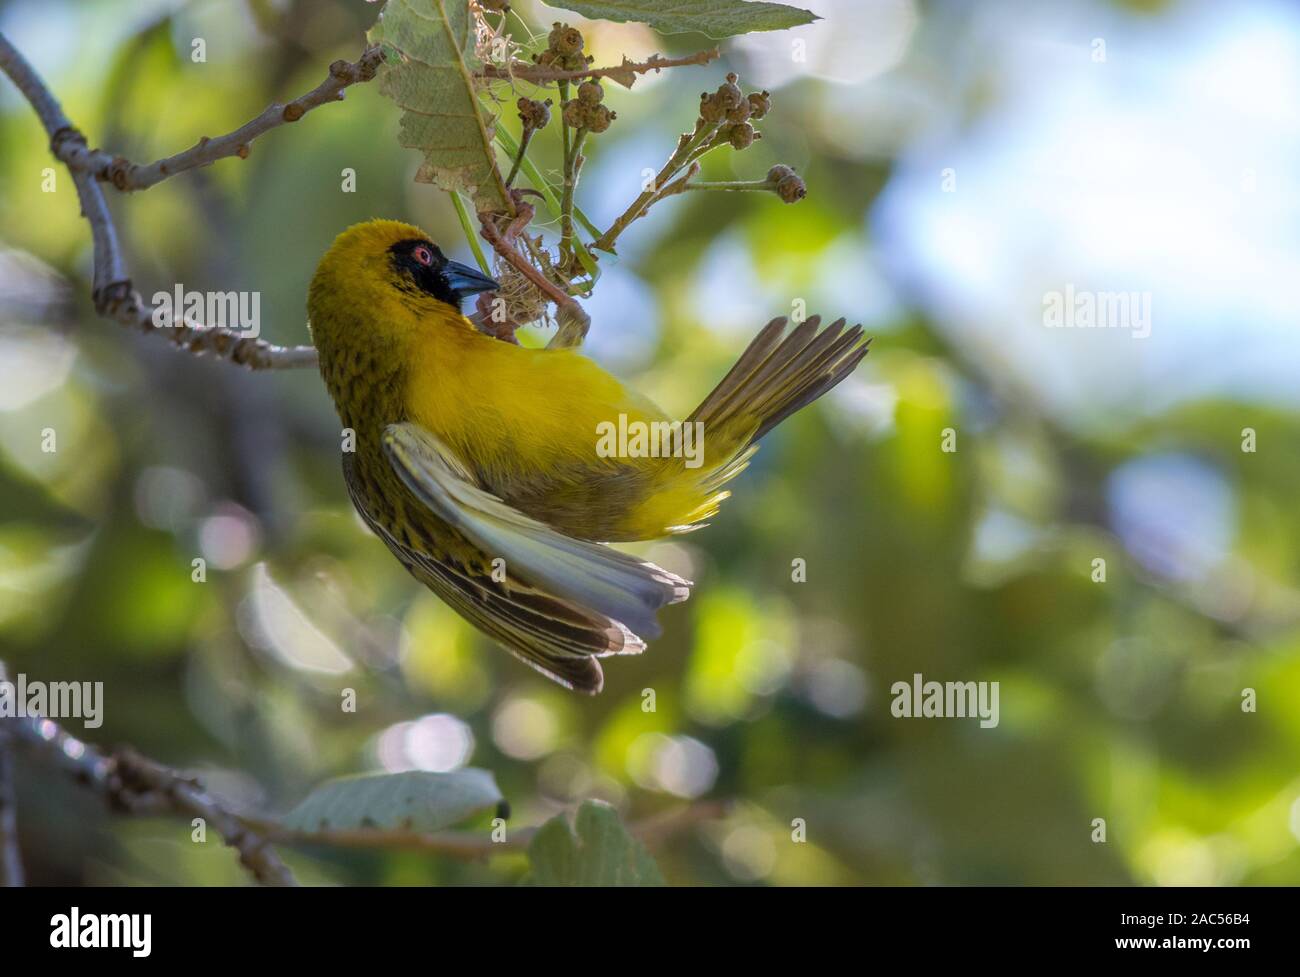 Male southern masked-weaver hangs below the spot where he will start weaving a nest image in horizontal format with copy space Stock Photo